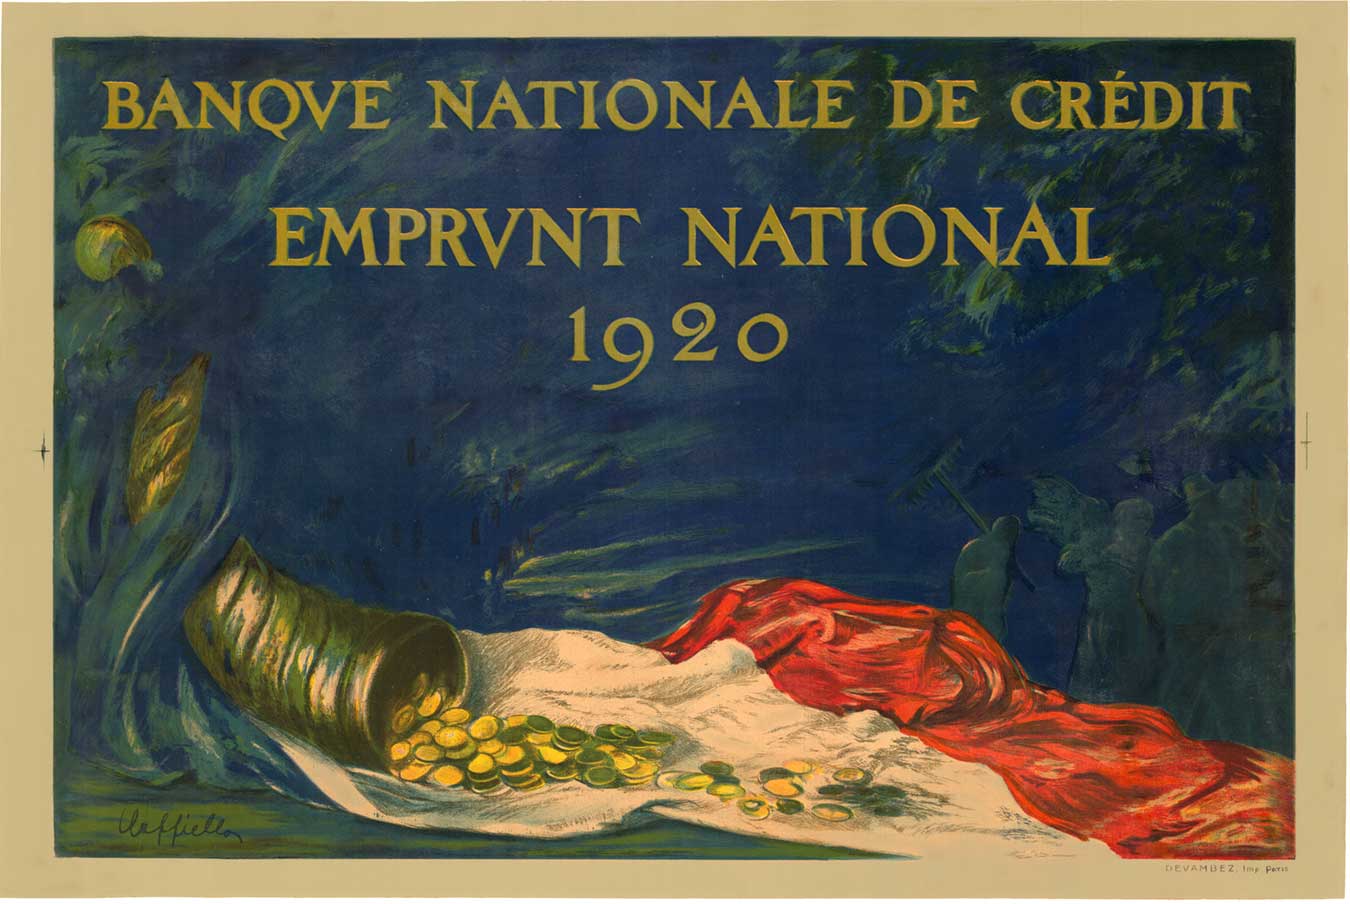 Original “Banque Nationale de Credit Emprunt National 1920” vintage Cappiello poster. Linen backed in B condition with touch-up restoration in various poster parts. The price reflects the B condition of this vintage poster. Lithograph printed on unb